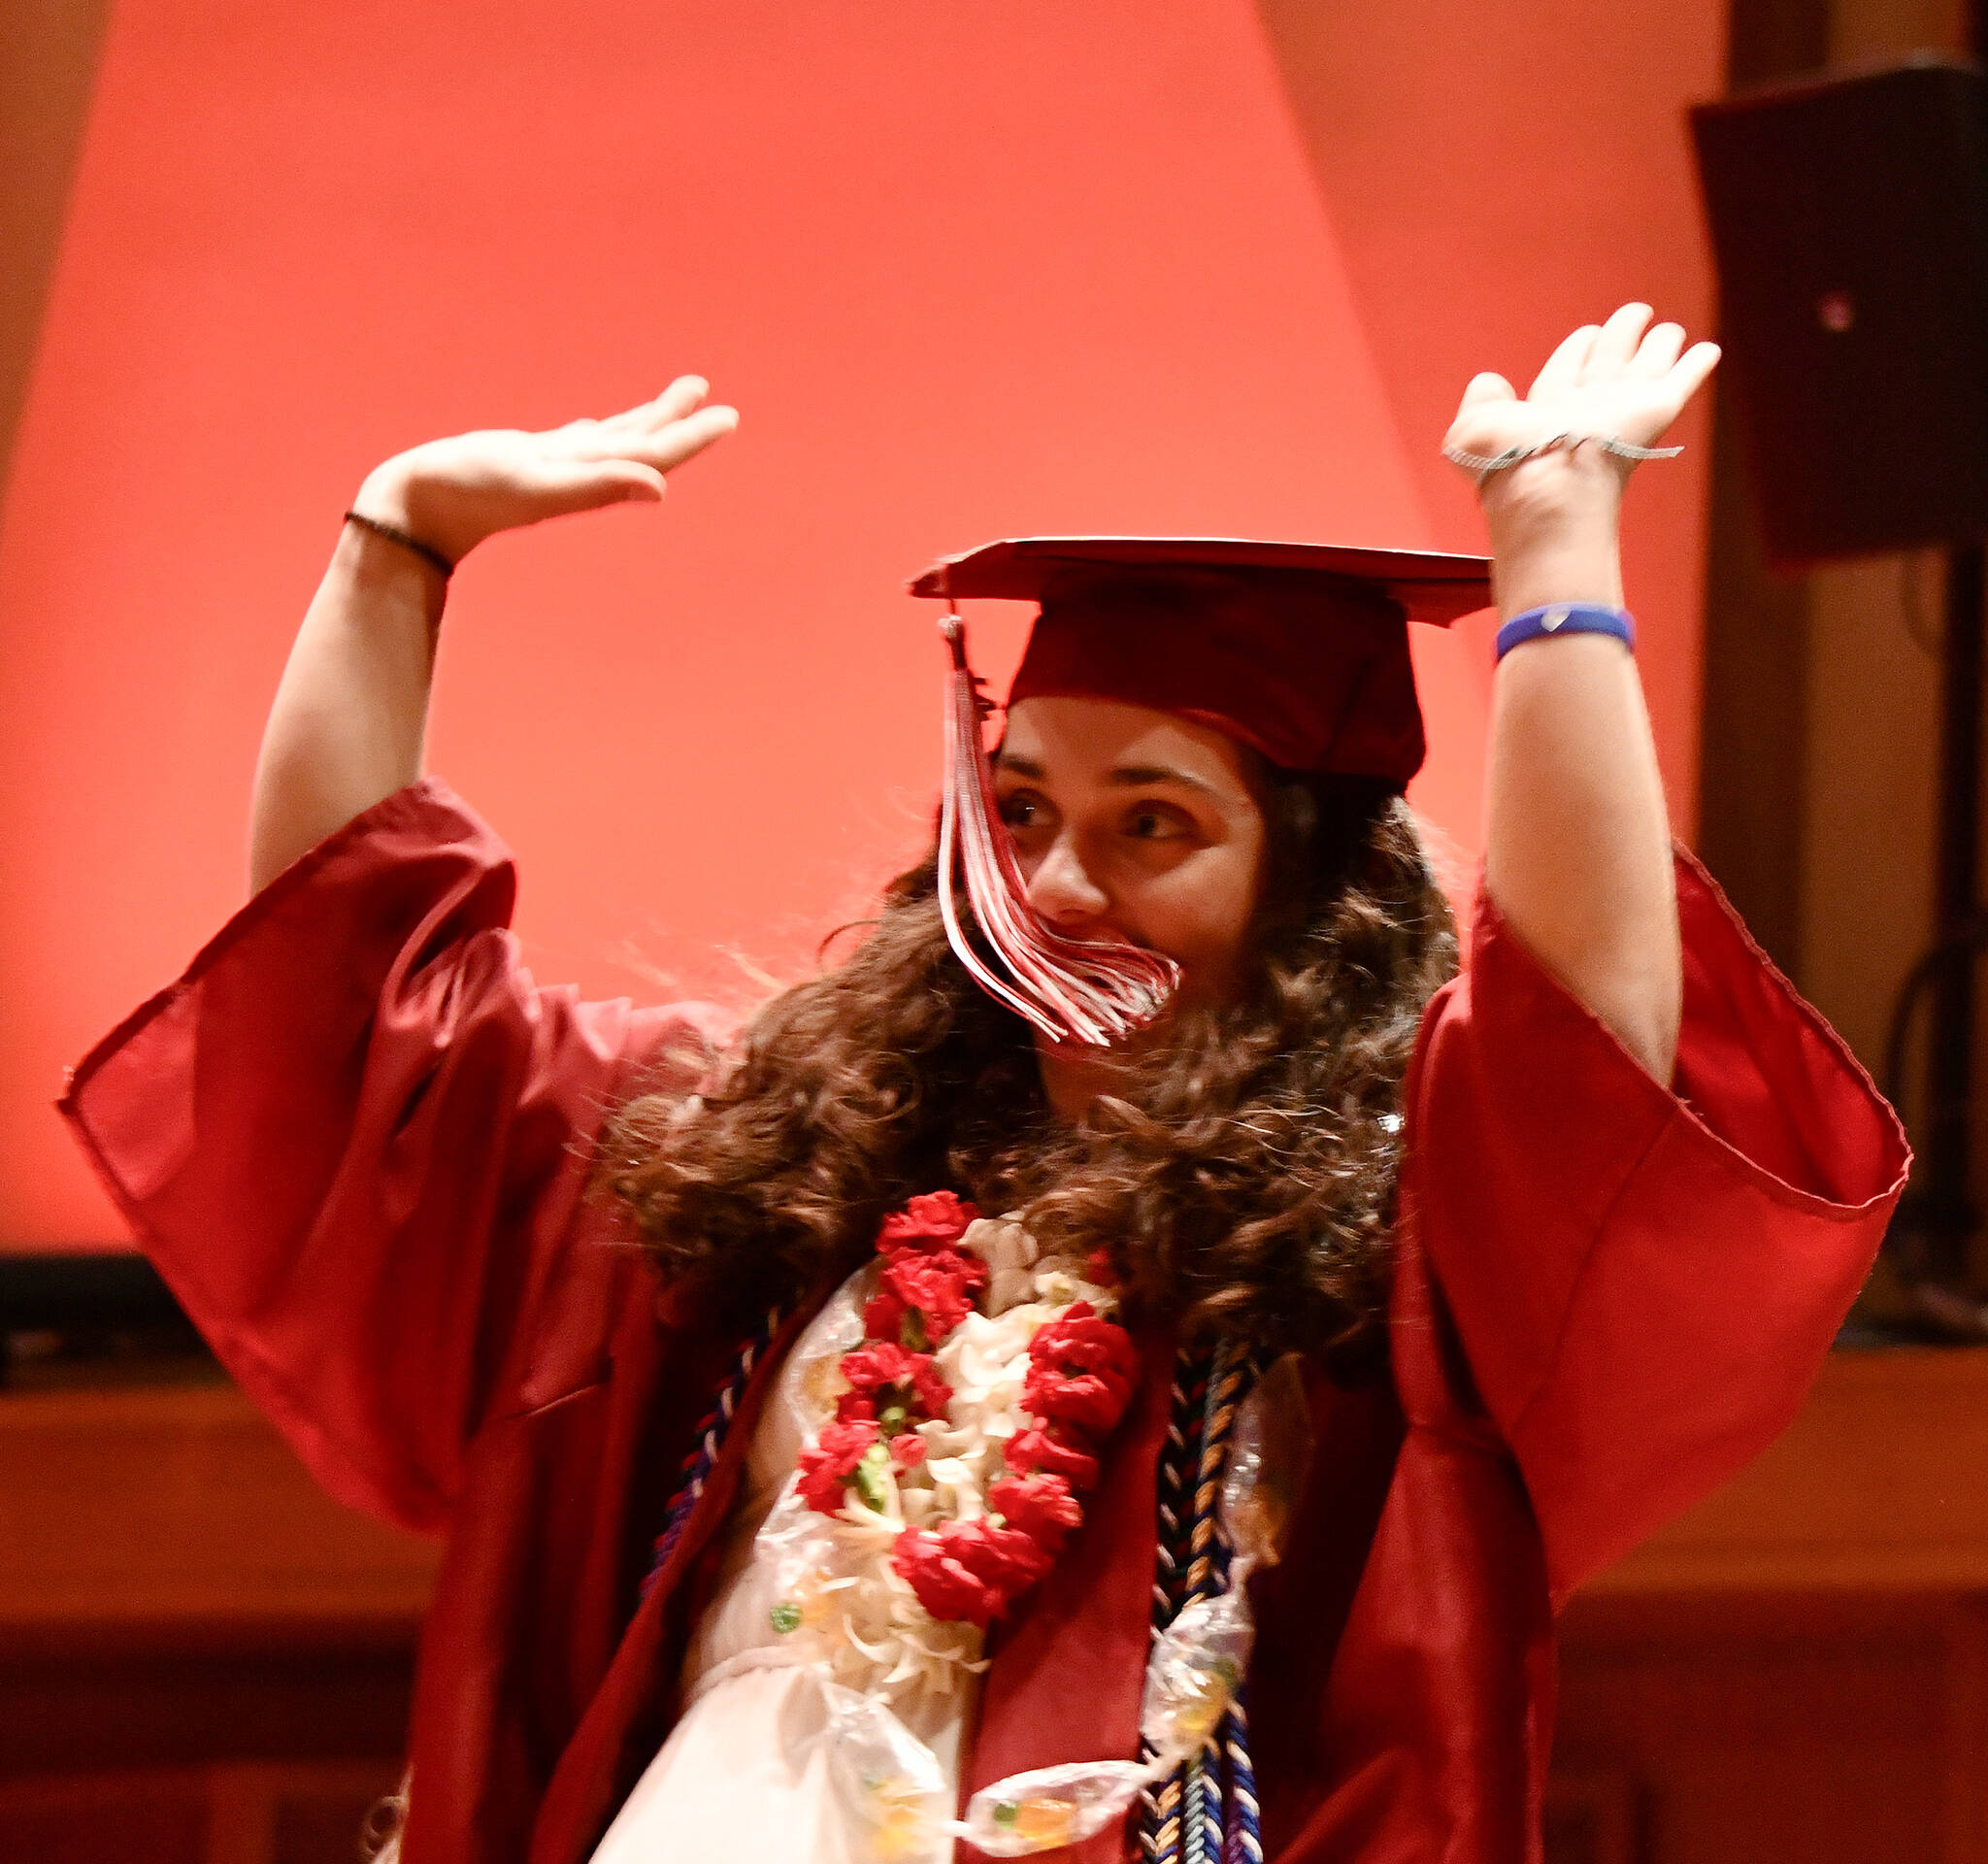 Mercer Island High School graduate Macy Poll is in full celebration mode while preparing to receive her diploma on June 8 at Benaroya Hall in Seattle. Andy Nystrom/ staff photo